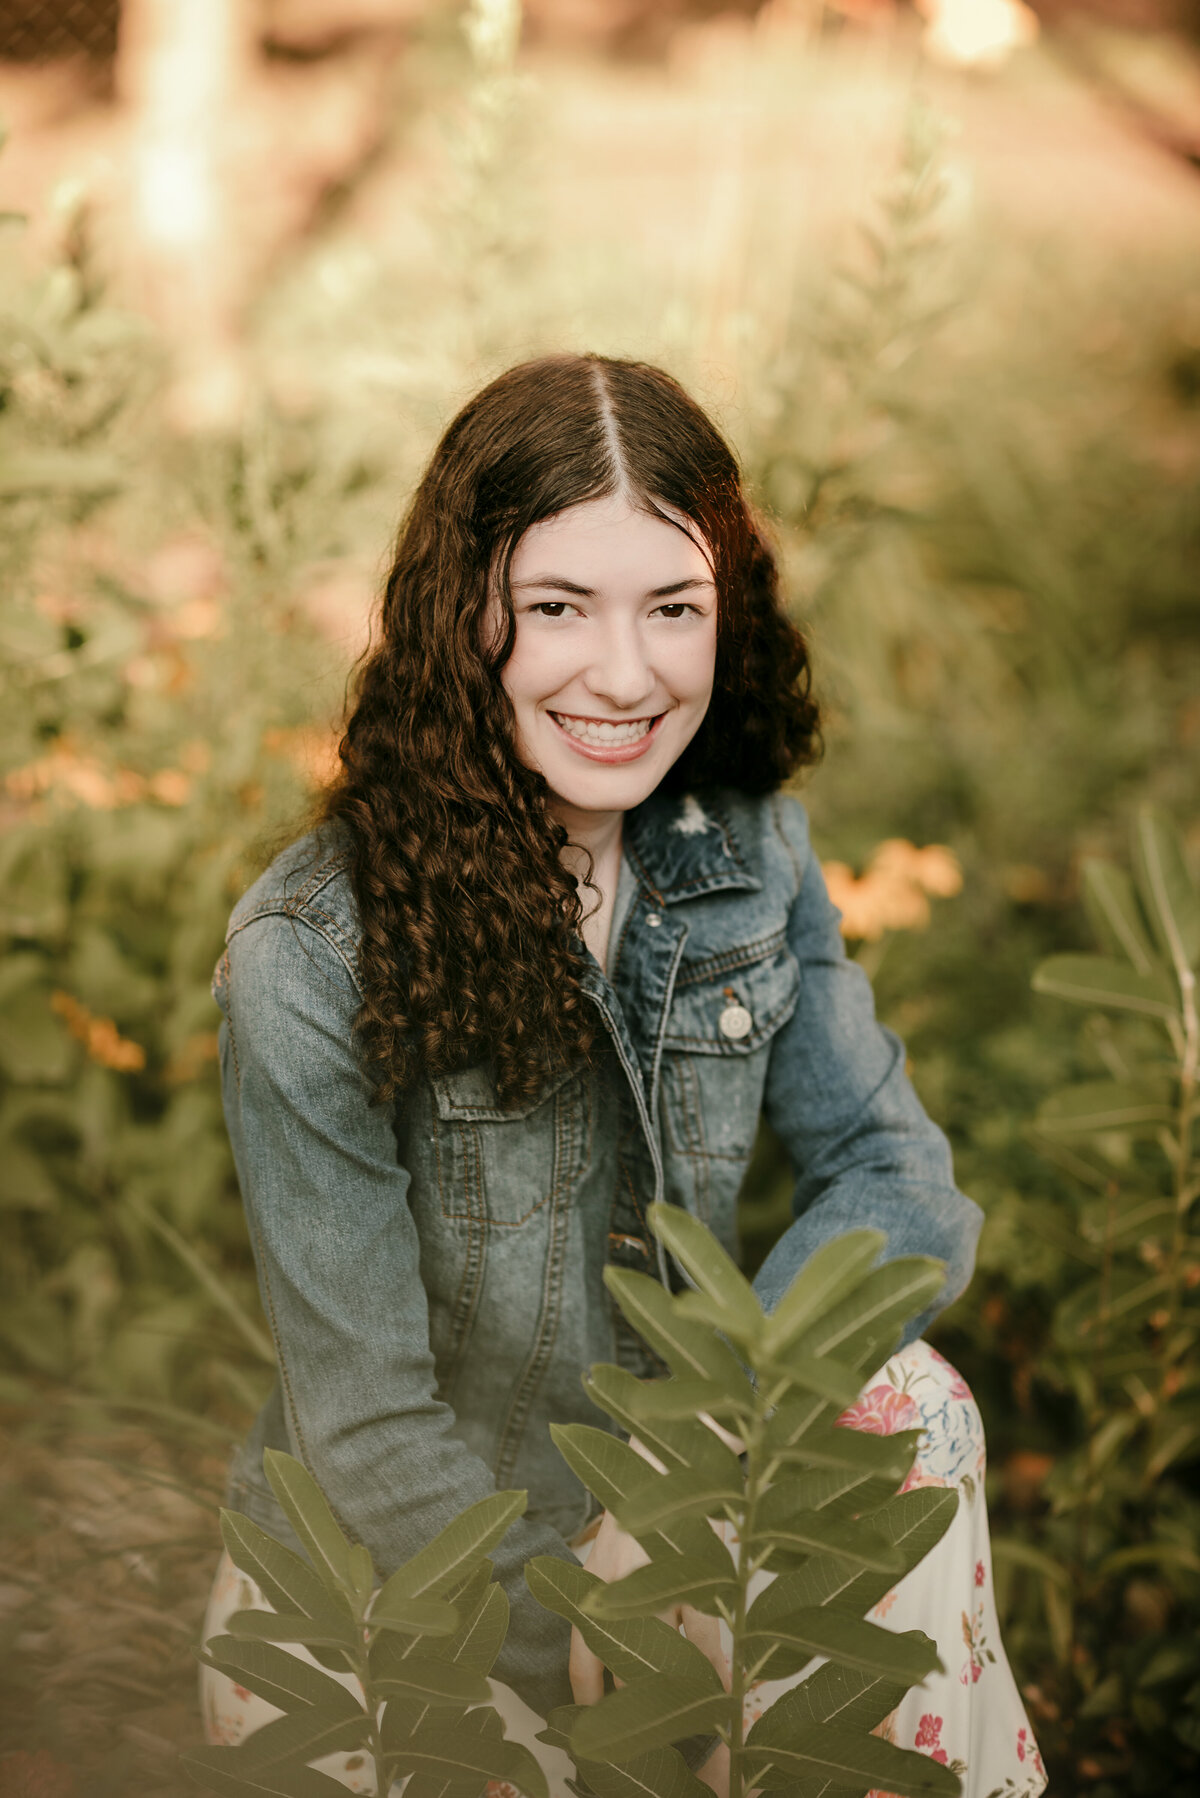 Indulge in garden grace with Shannon Kathleen Photography's Minneapolis senior portraits. Reserve your session for blooming beauty and cherished memories